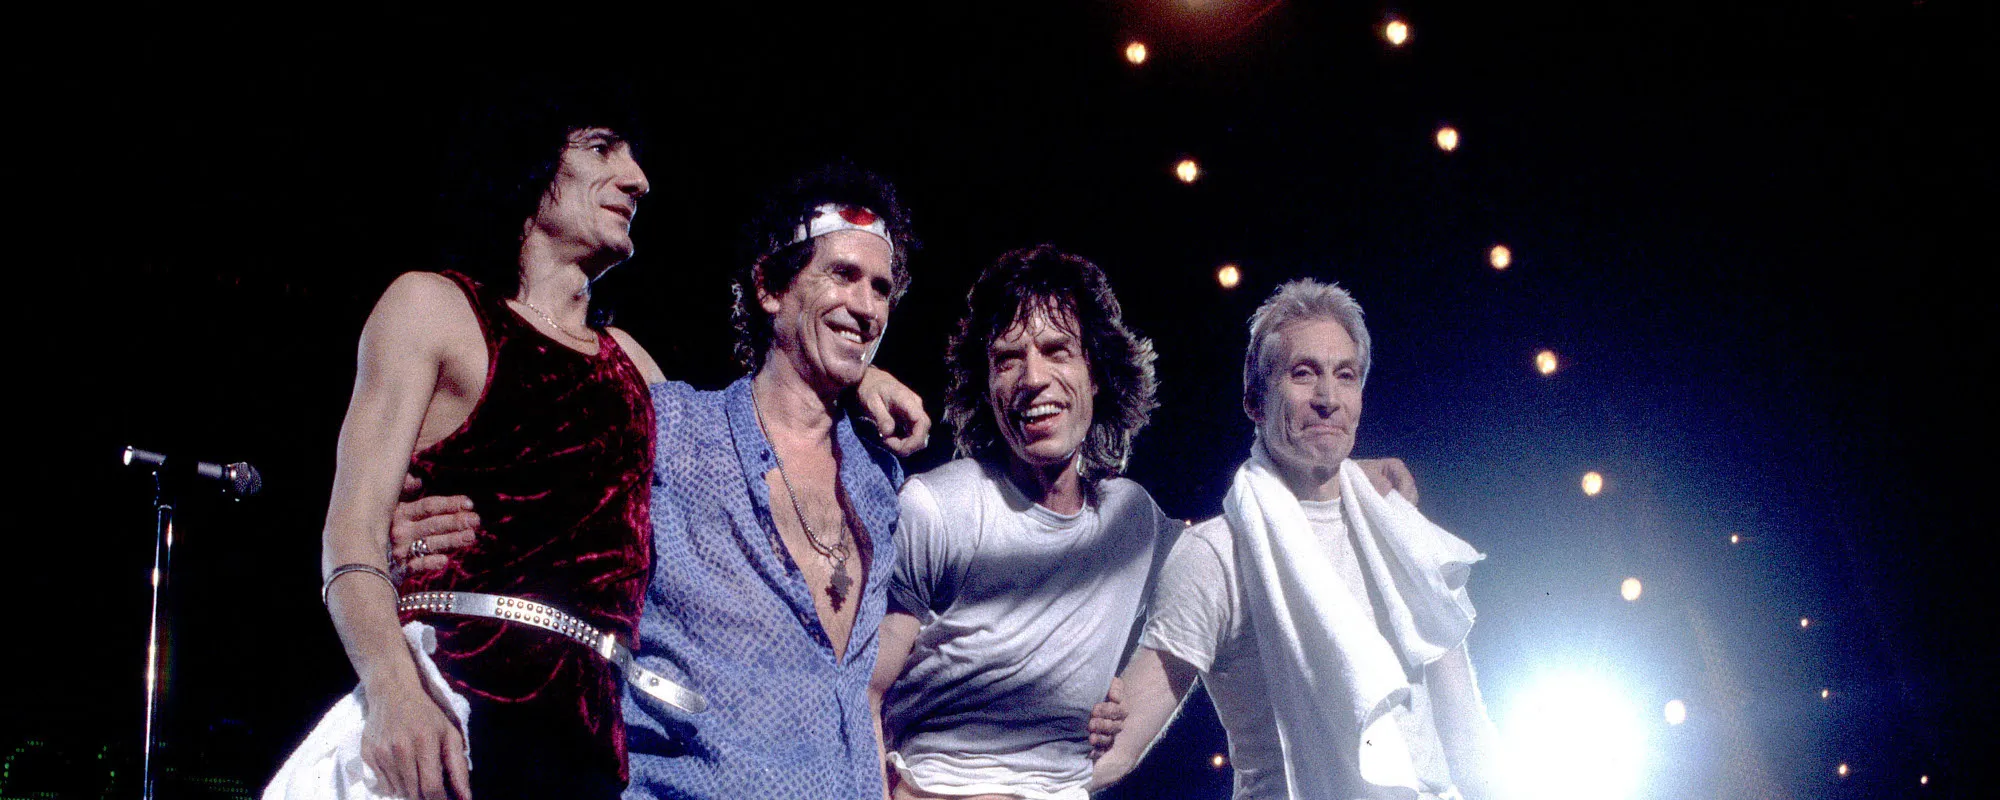 Remember When? The Rolling Stones Played Massive 1981 Show at JFK Stadium